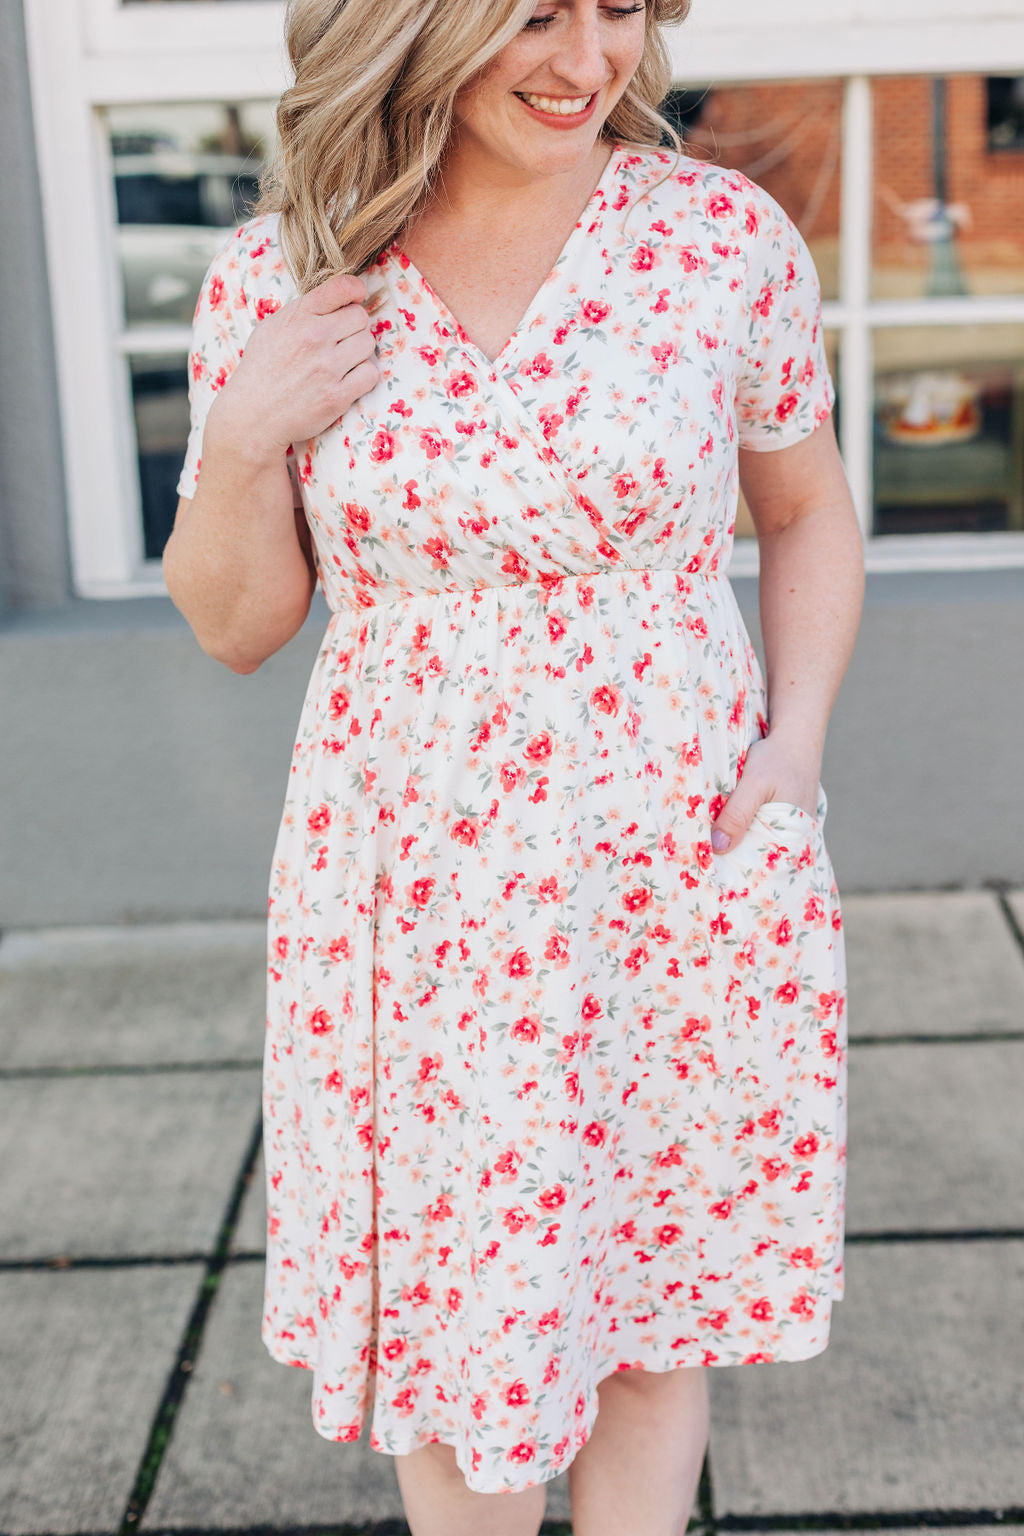 Michelle Mae Tinley Dress - Ivory Floral